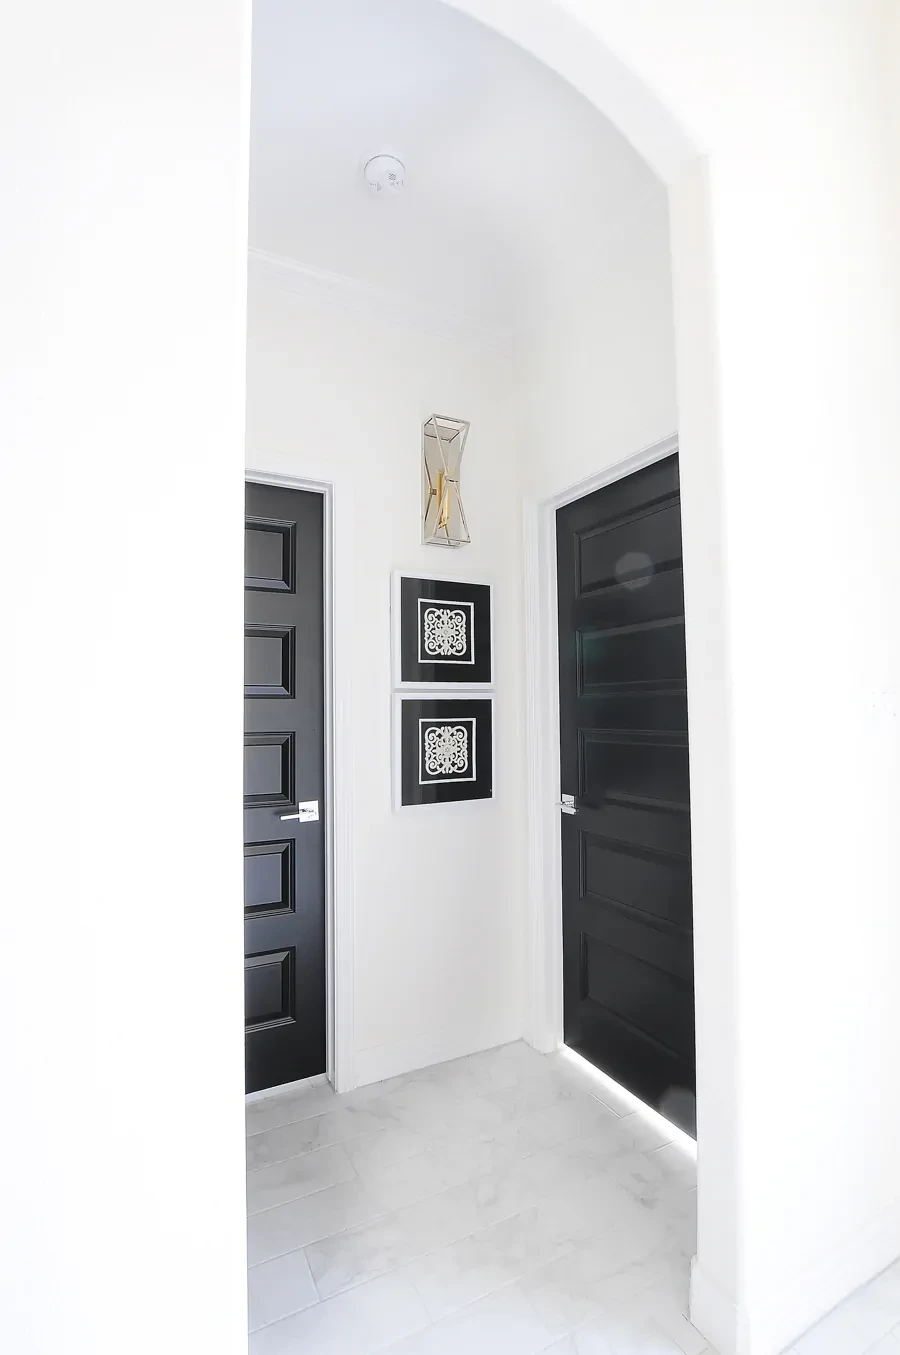 Black doors in a hallway with white walls and arches